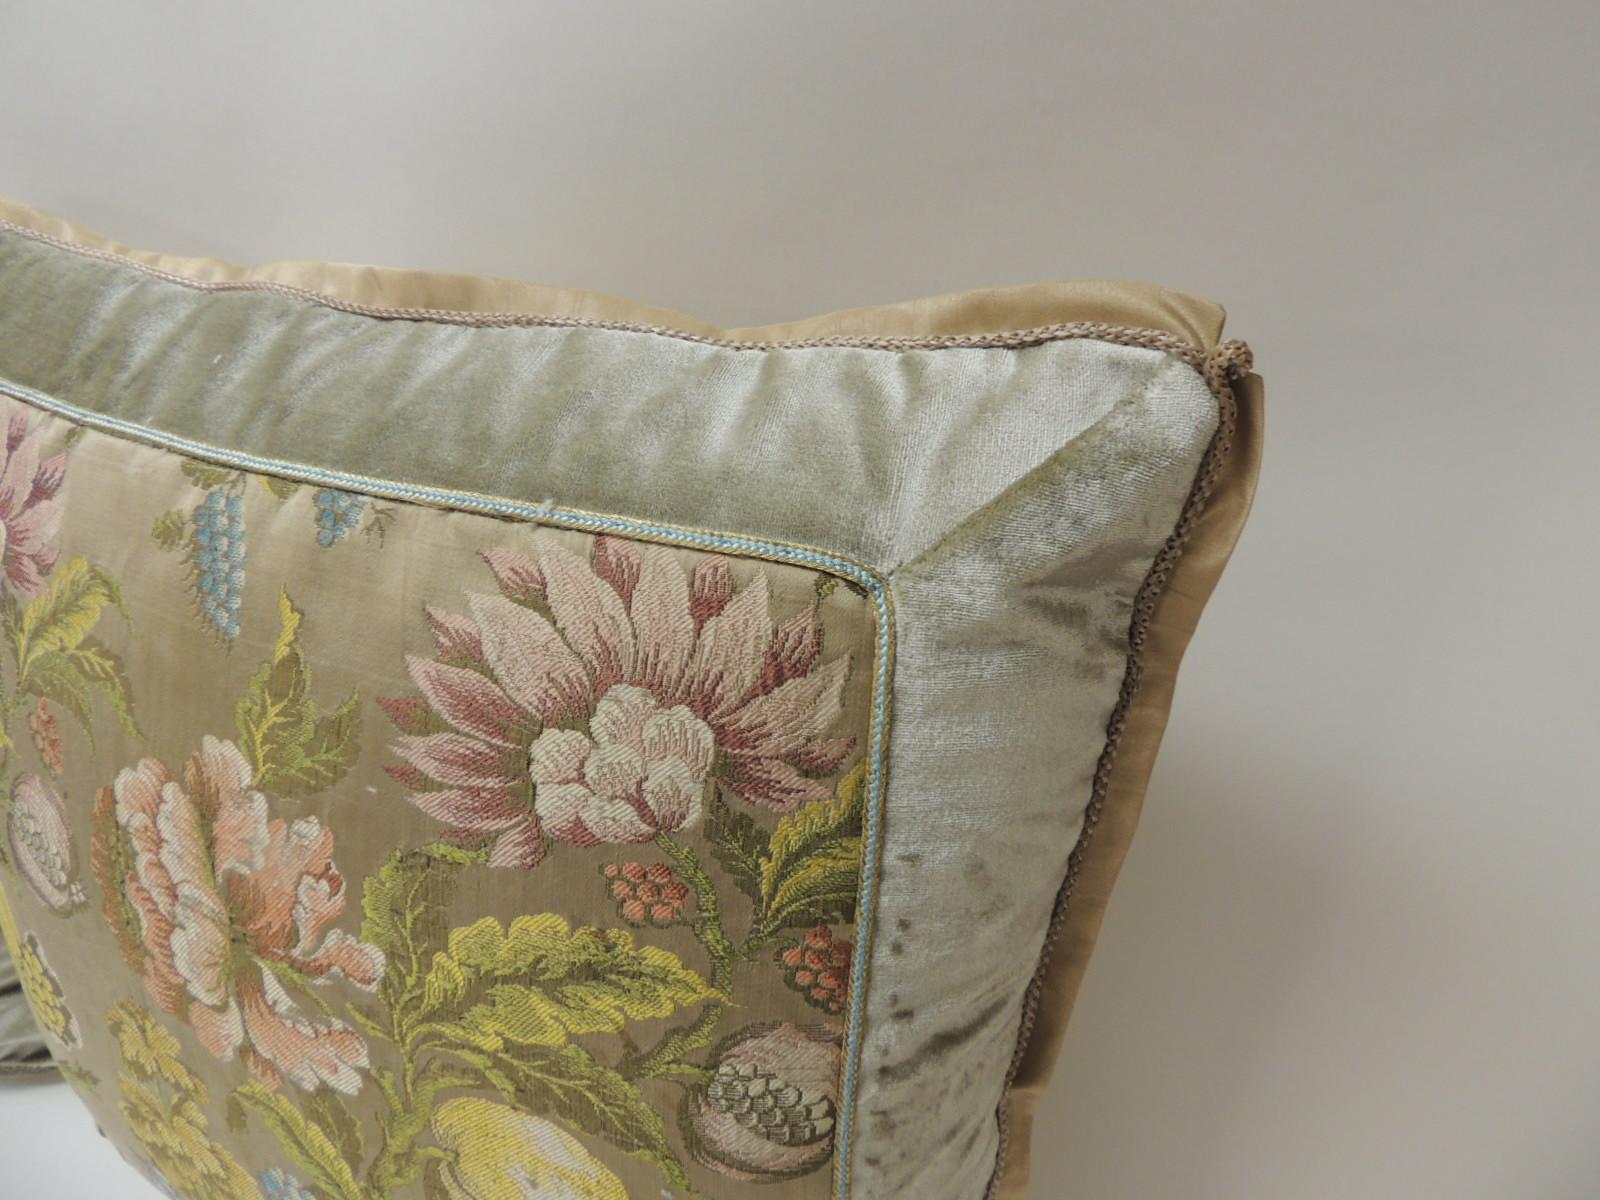 Pair of 19th century French brocade floral decorative pillows
Pair of yellow and green floral square antique textile decorative pillows. Colorful French woven silk brocade pillows, framed with silk velvet and embellished with a small silk blue and